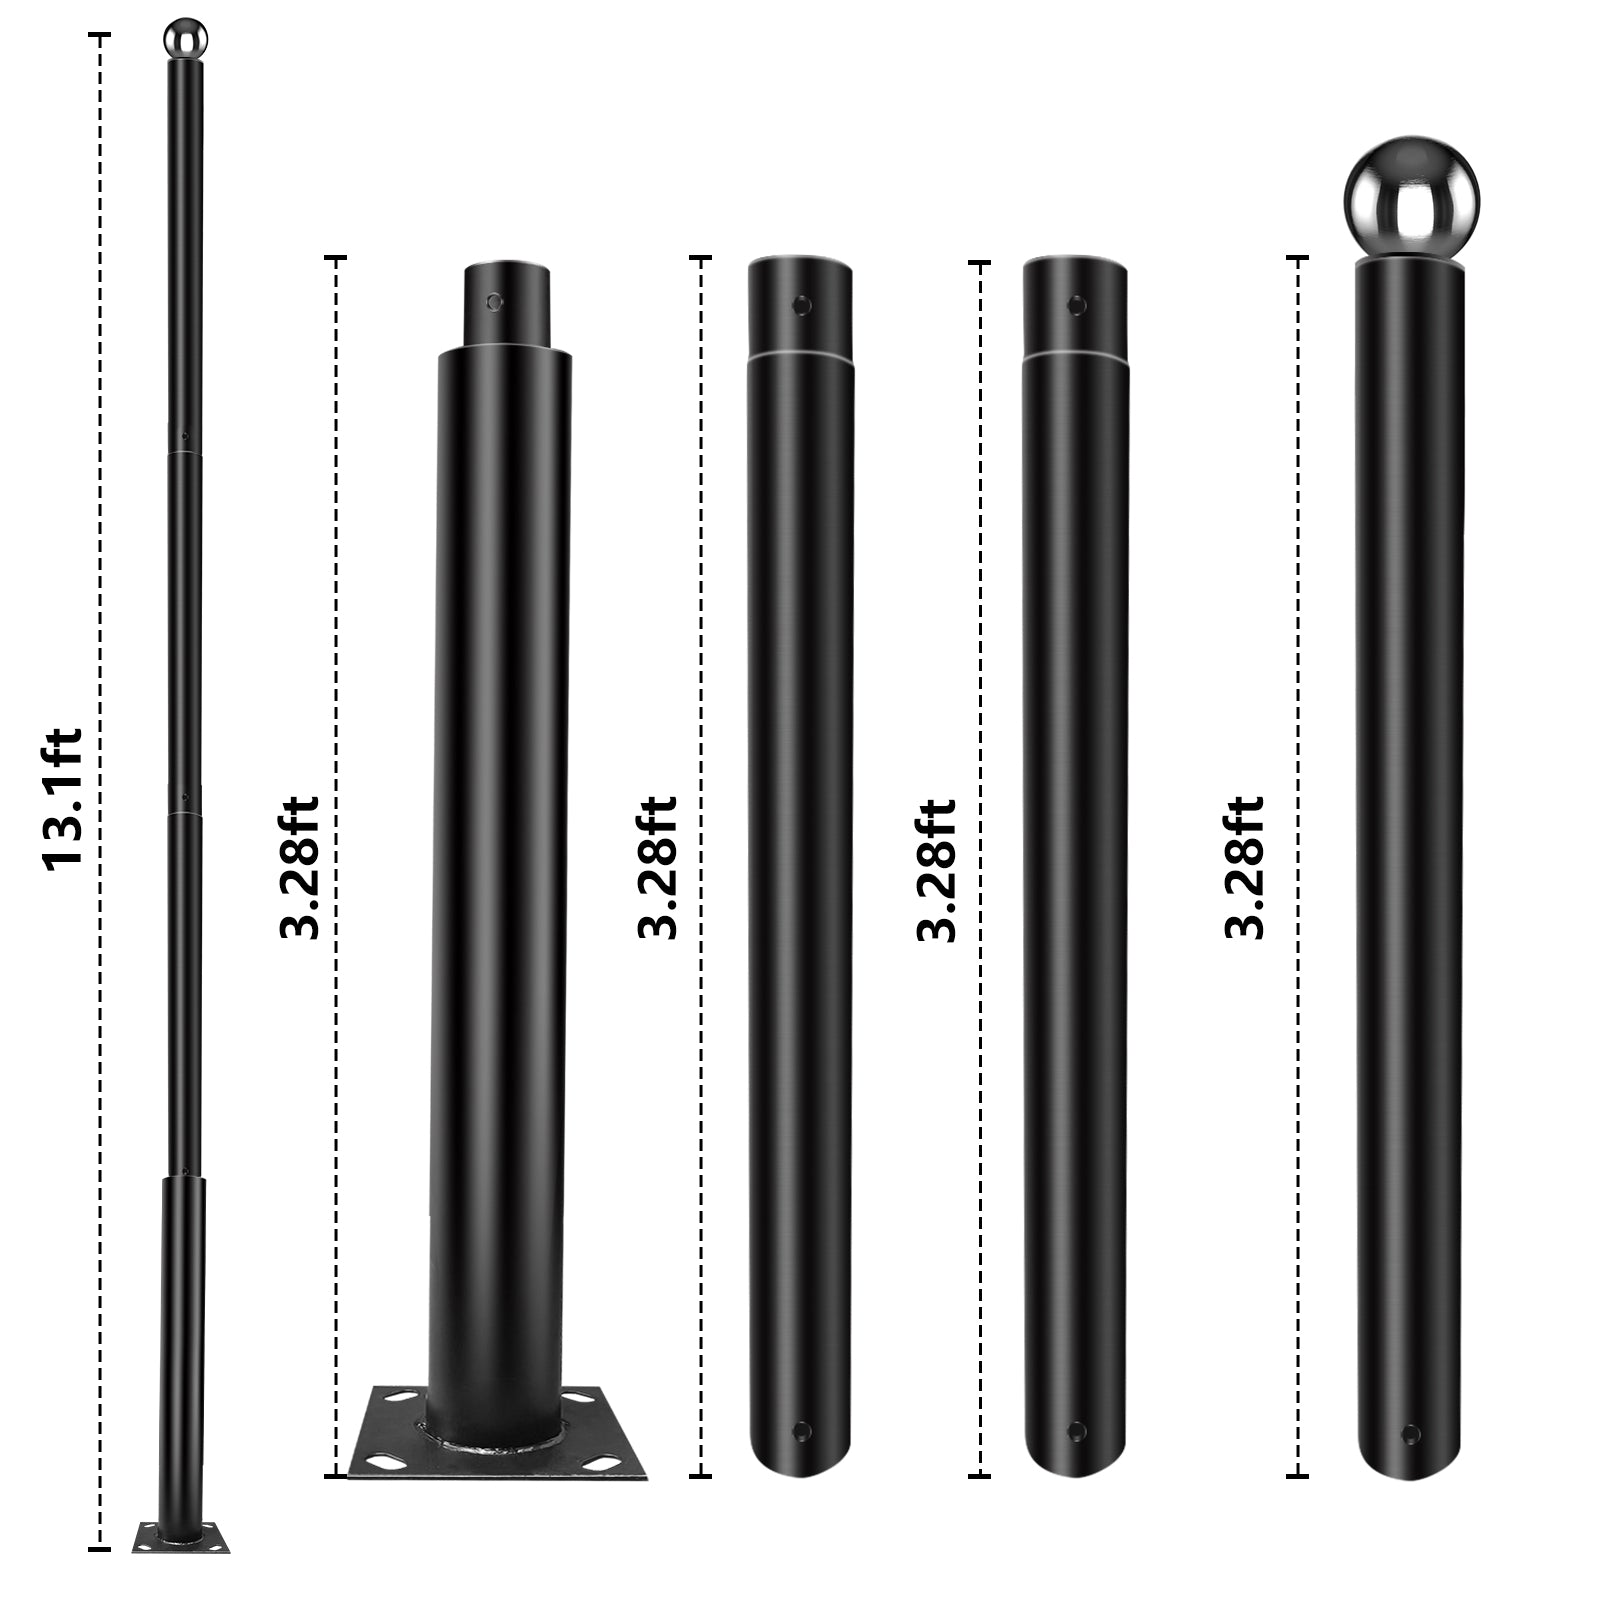 TENKOO Street Light Pole Black 3.1 in. UP to 13.1 FT Tall.  Outdoor Universal Metal Street Light Pole Post with Base Mounting Steel Anchors